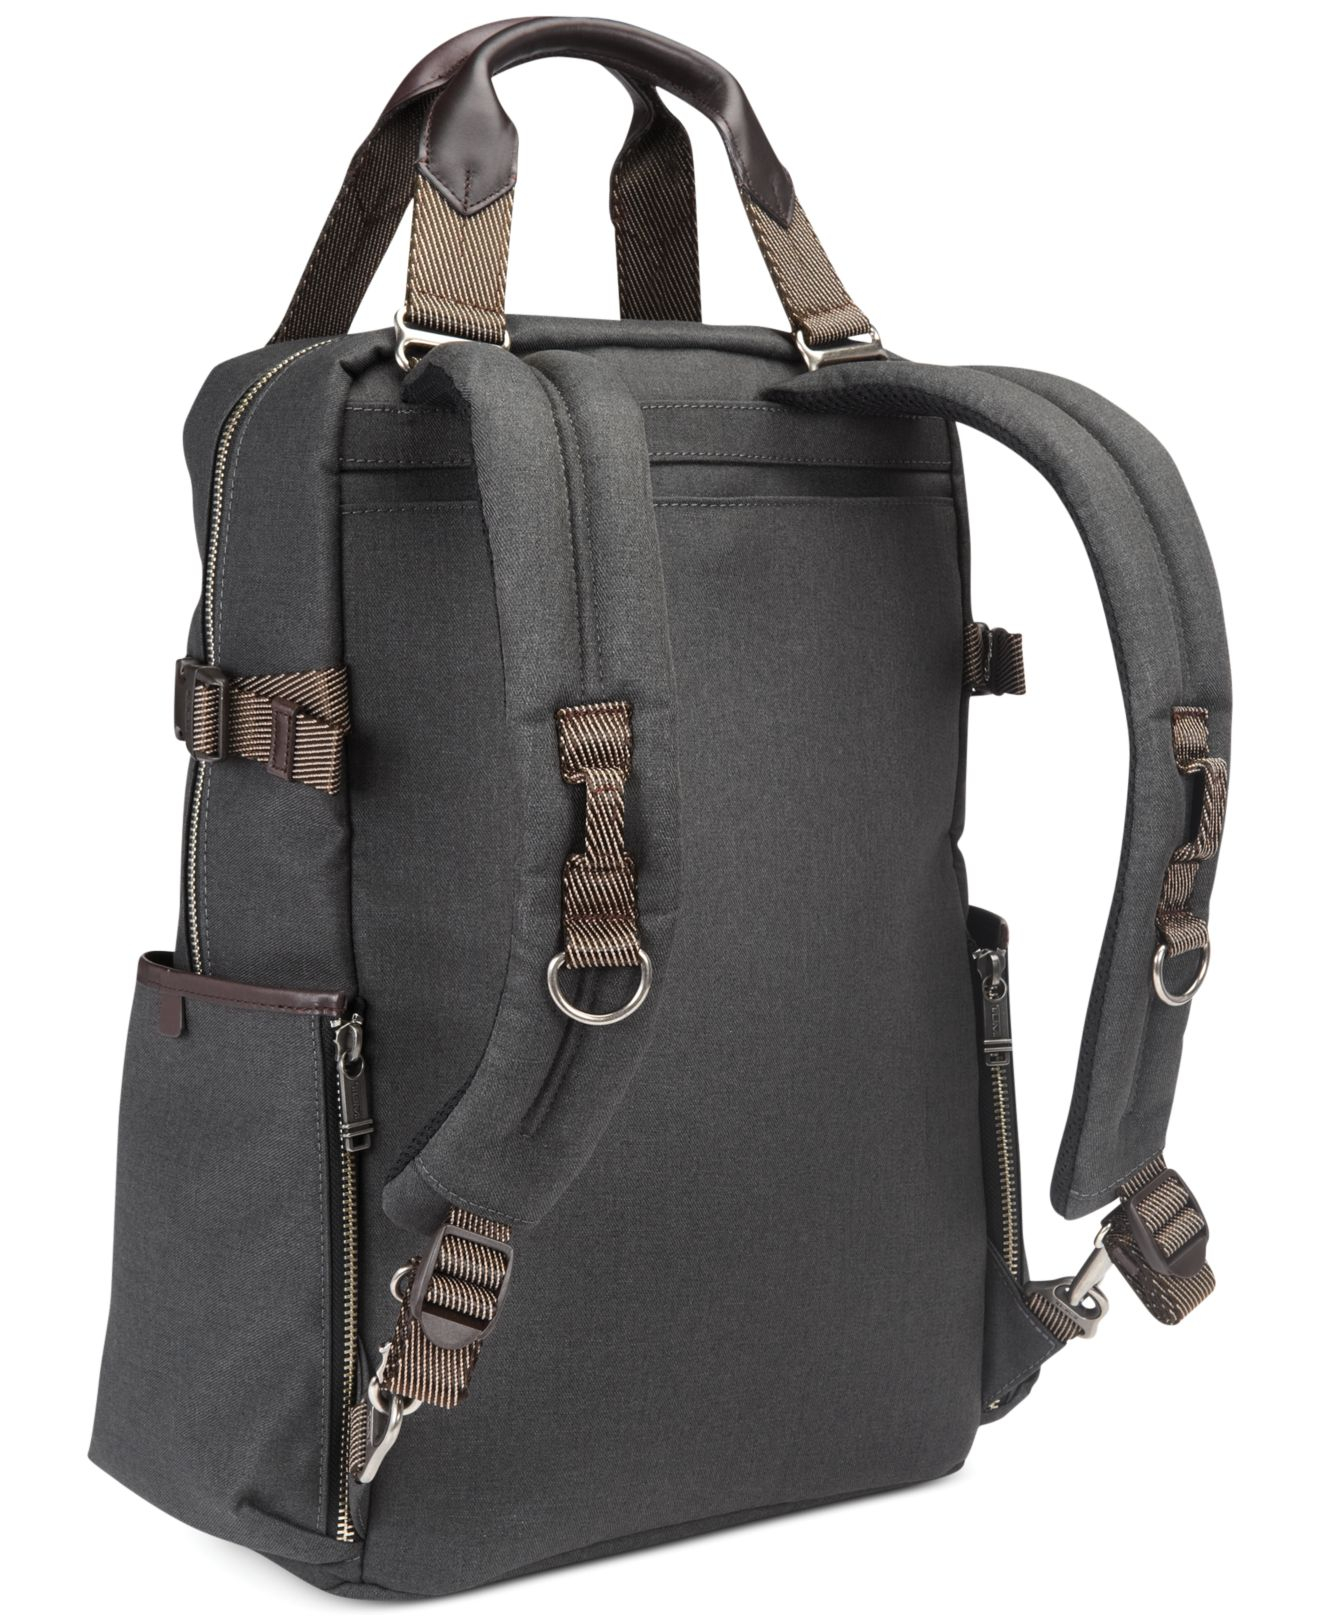 Tumi Alpha Bravo Lejeune Backpack Tote in Anthracite (Gray) for Men - Lyst